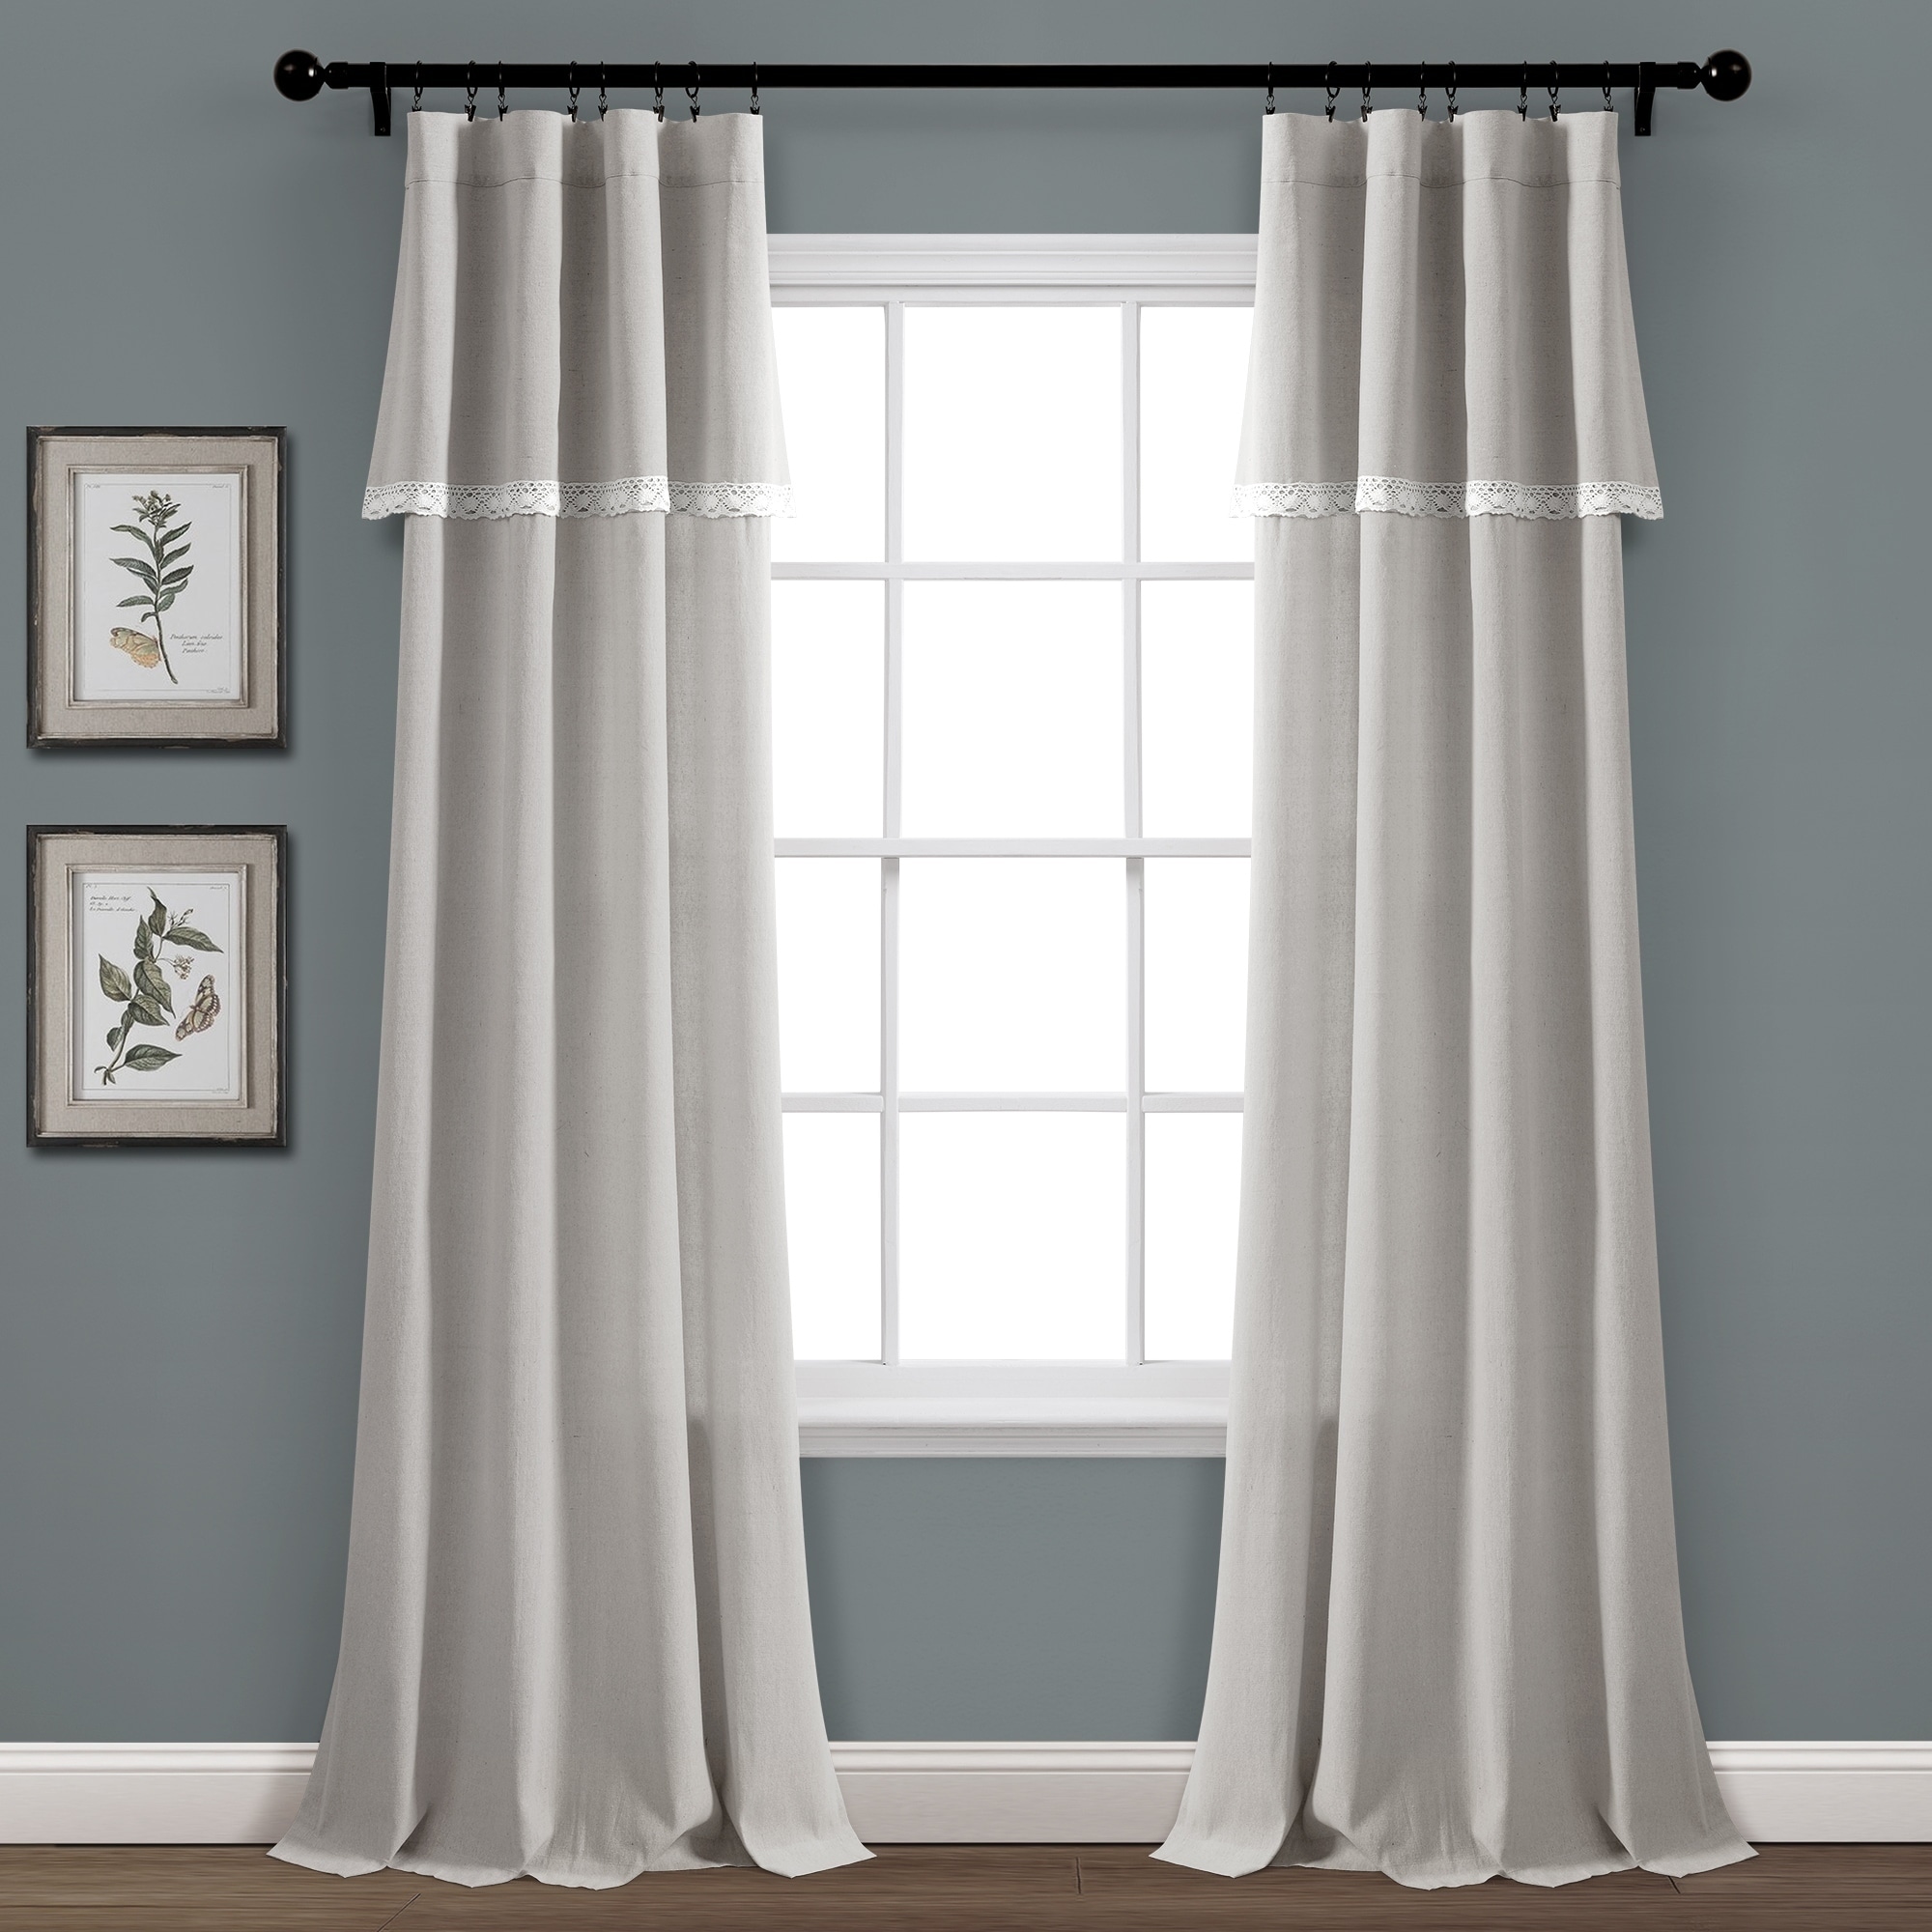 Linens and Lace Chenille Top Curtains Unisex